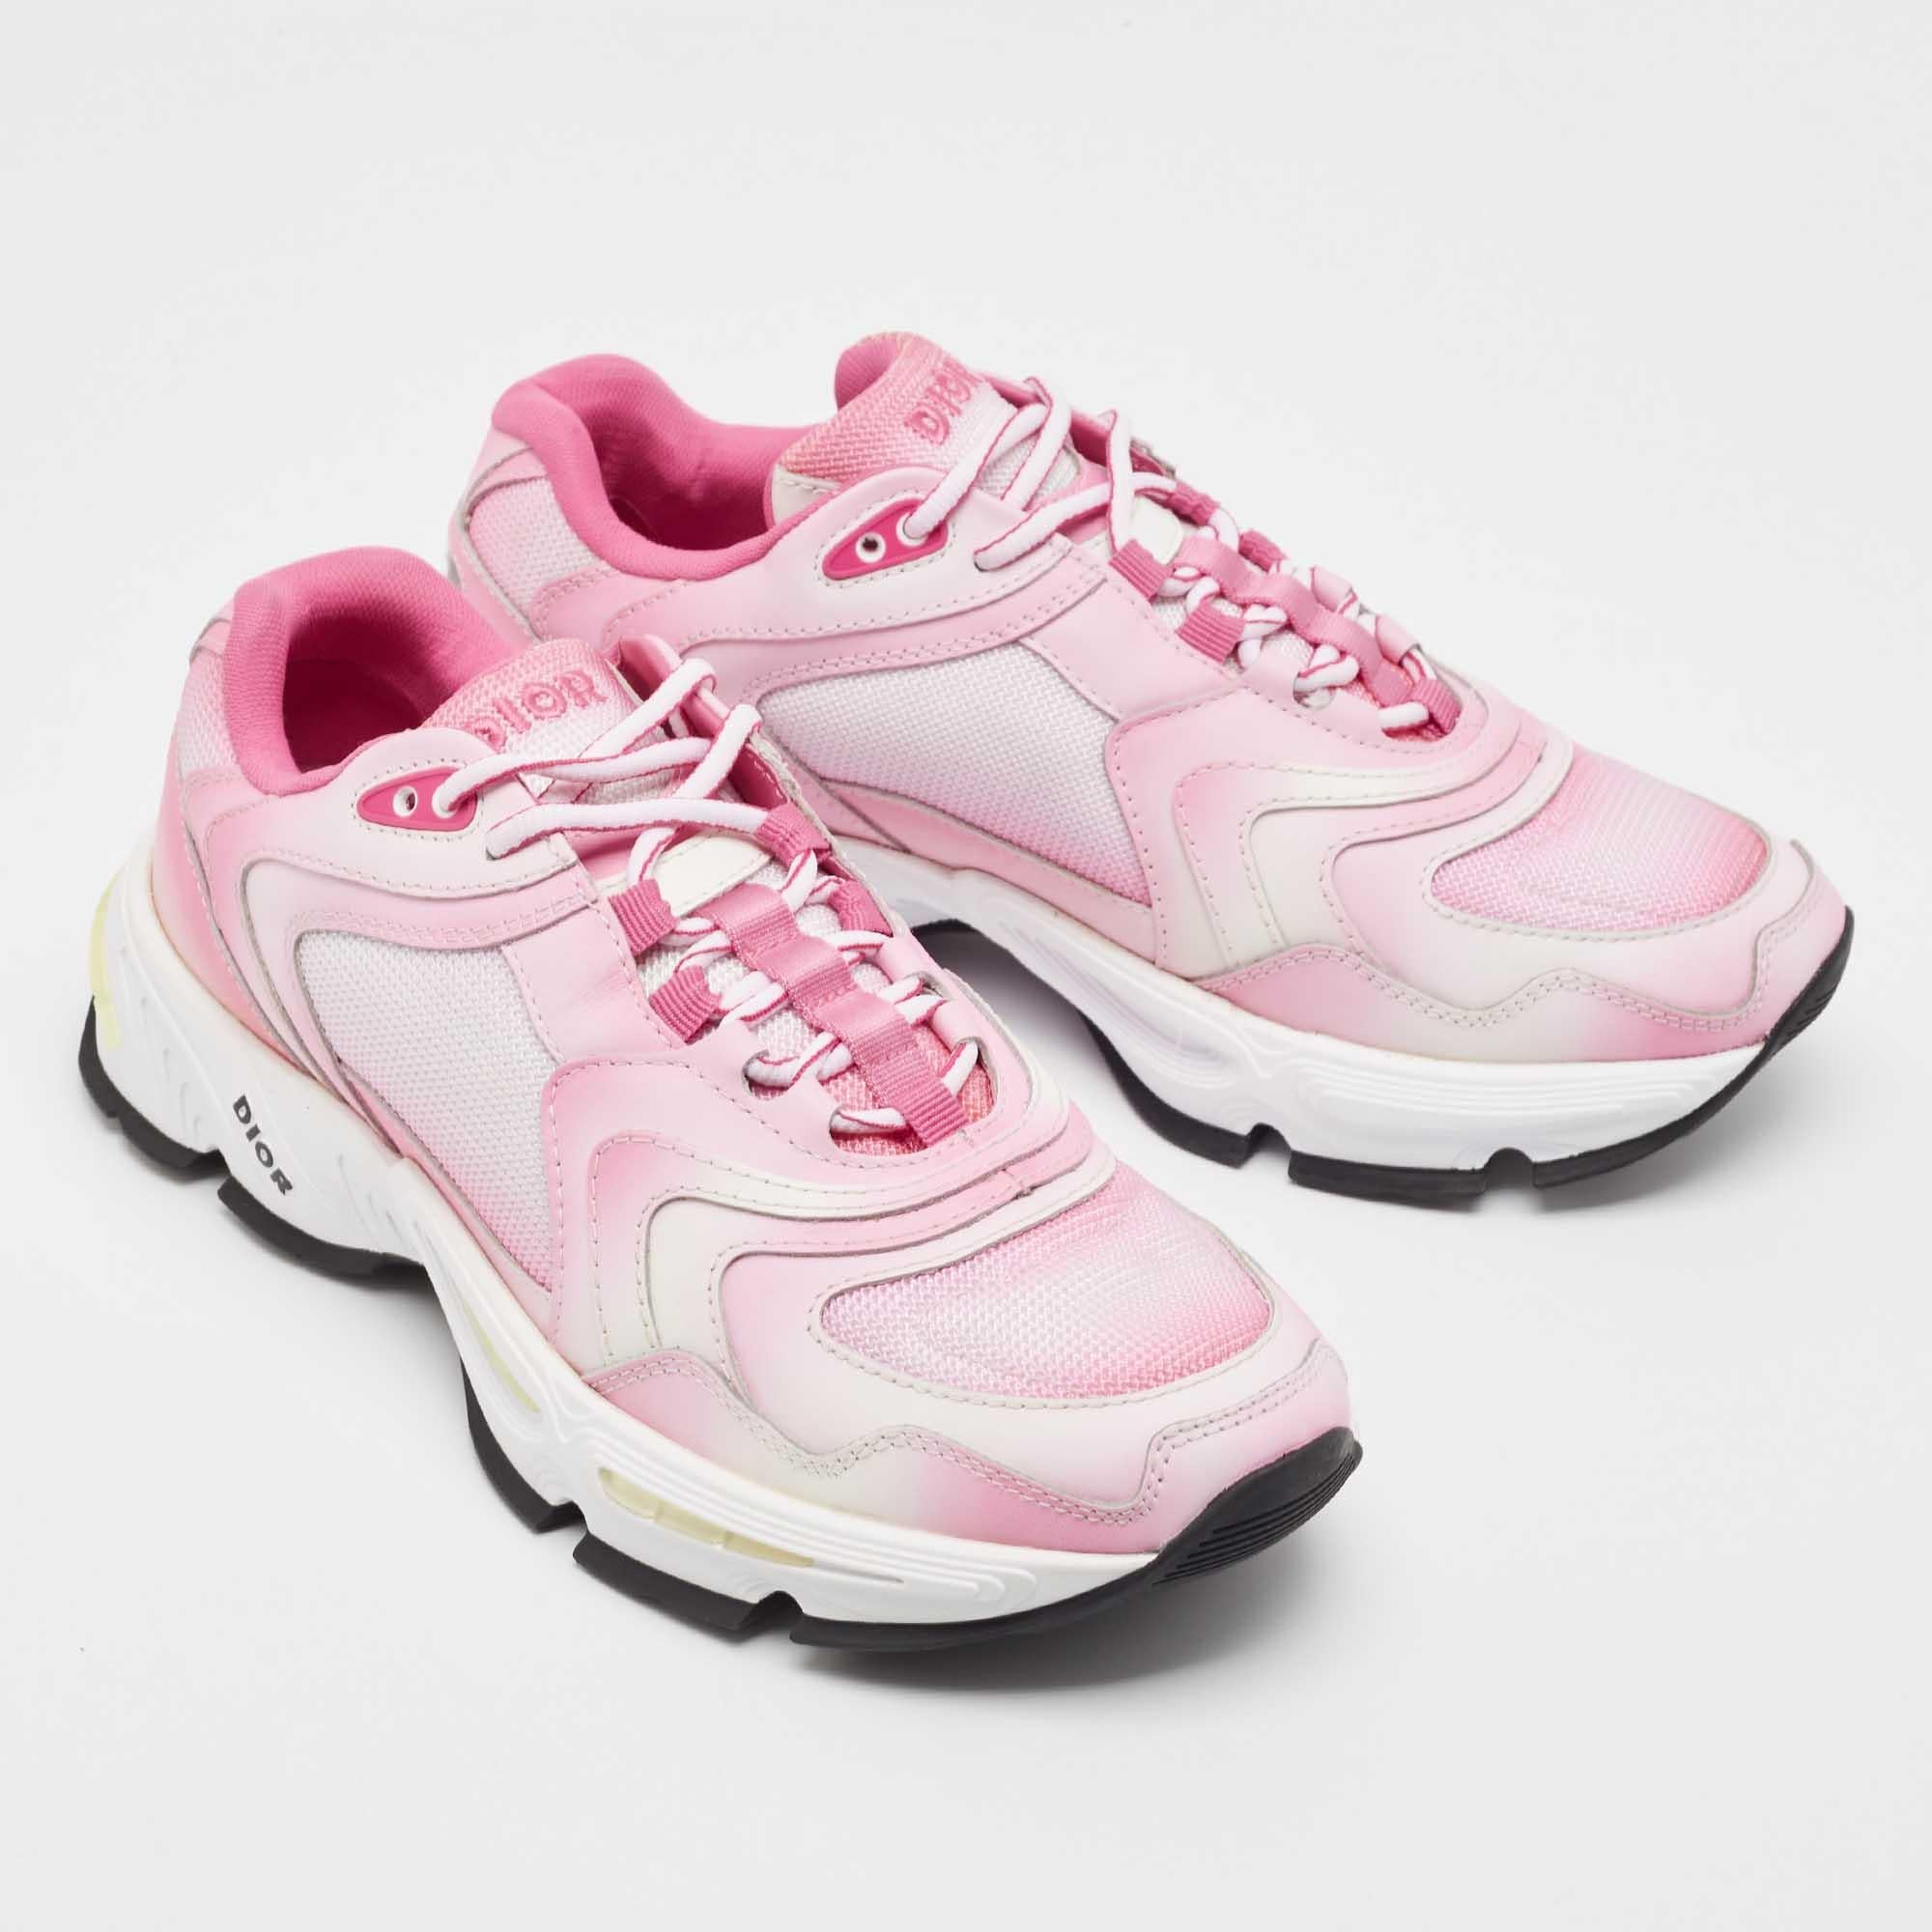 DIOR Pink/White Mesh and Leather CD1 Gradient Sneakers Size 41 In New Condition For Sale In Dubai, Al Qouz 2